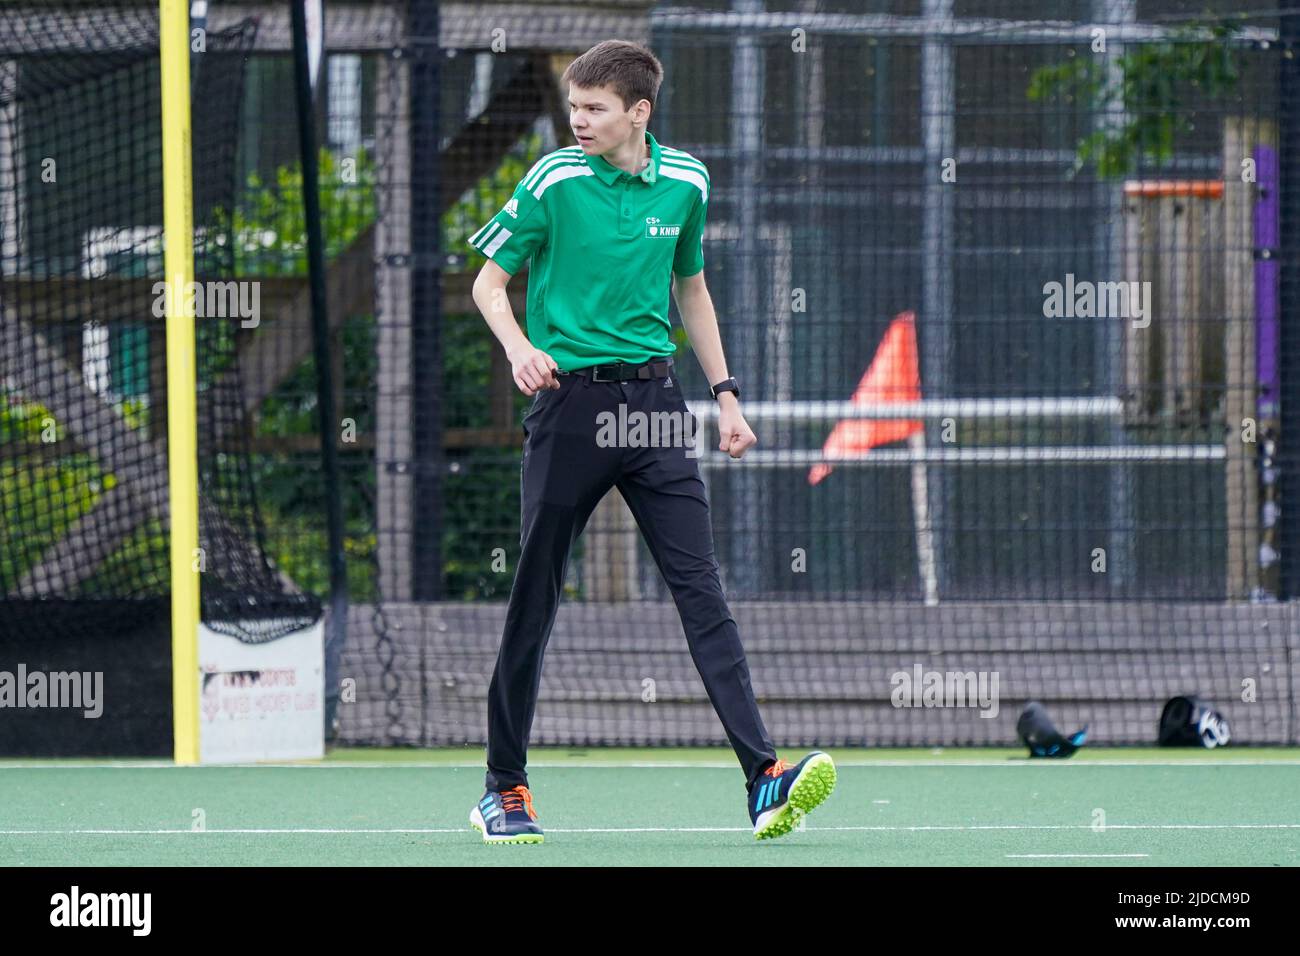 AMERSFOORT, NETHERLANDS - JUNE 19: referee of KNHB during the NK Jong Senioren match between Phoenix Hockey Zeist and Were Di at Sportpark AMHC on June 19, 2022 in Amersfoort, Netherlands (Photo by Jeroen Meuwsen/Orange Pictures) Stock Photo